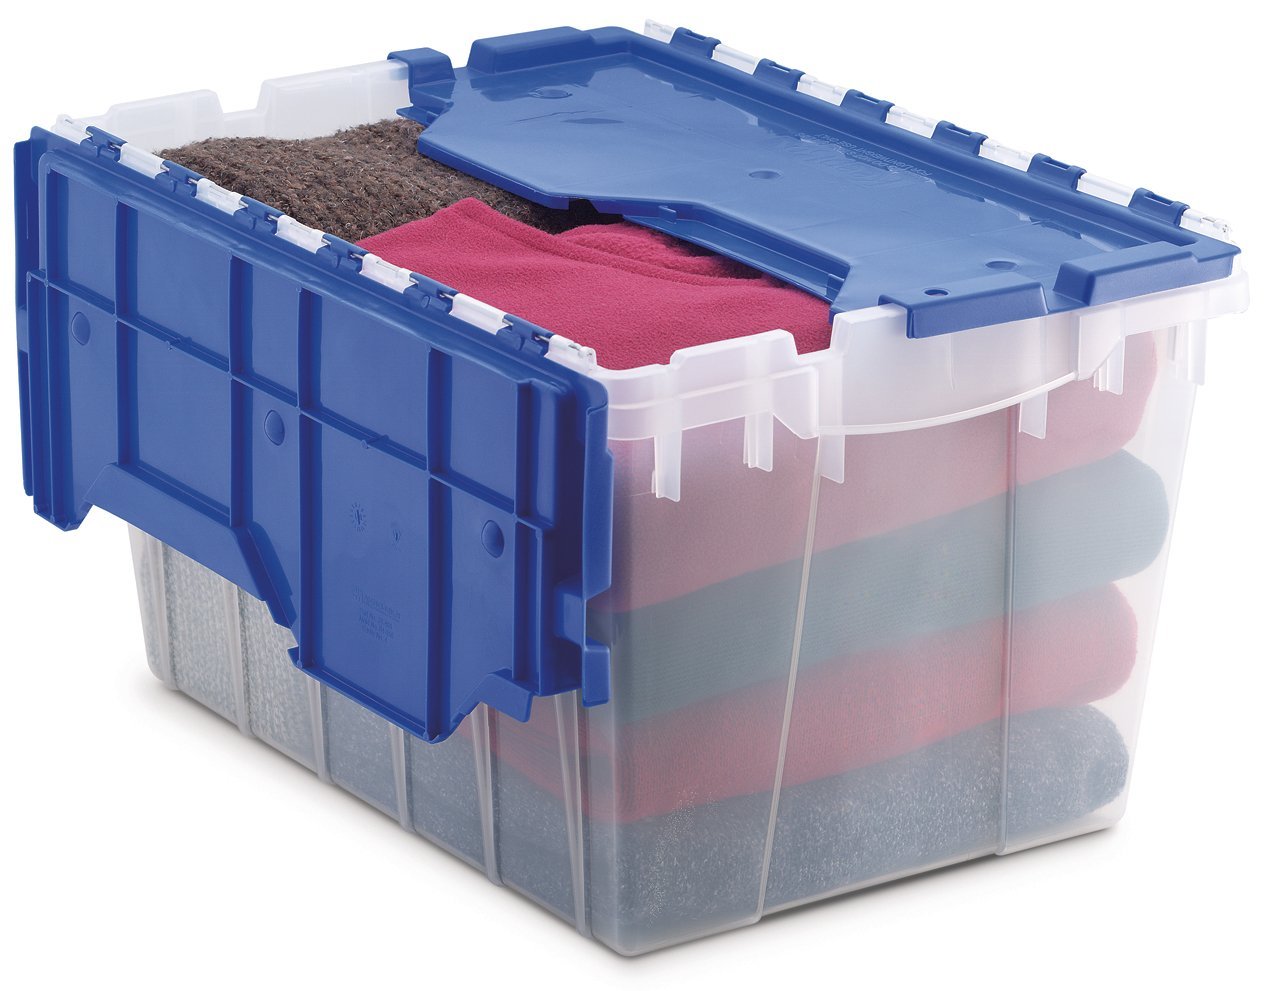 A clear storage bin with a blue lid and clothes inside.